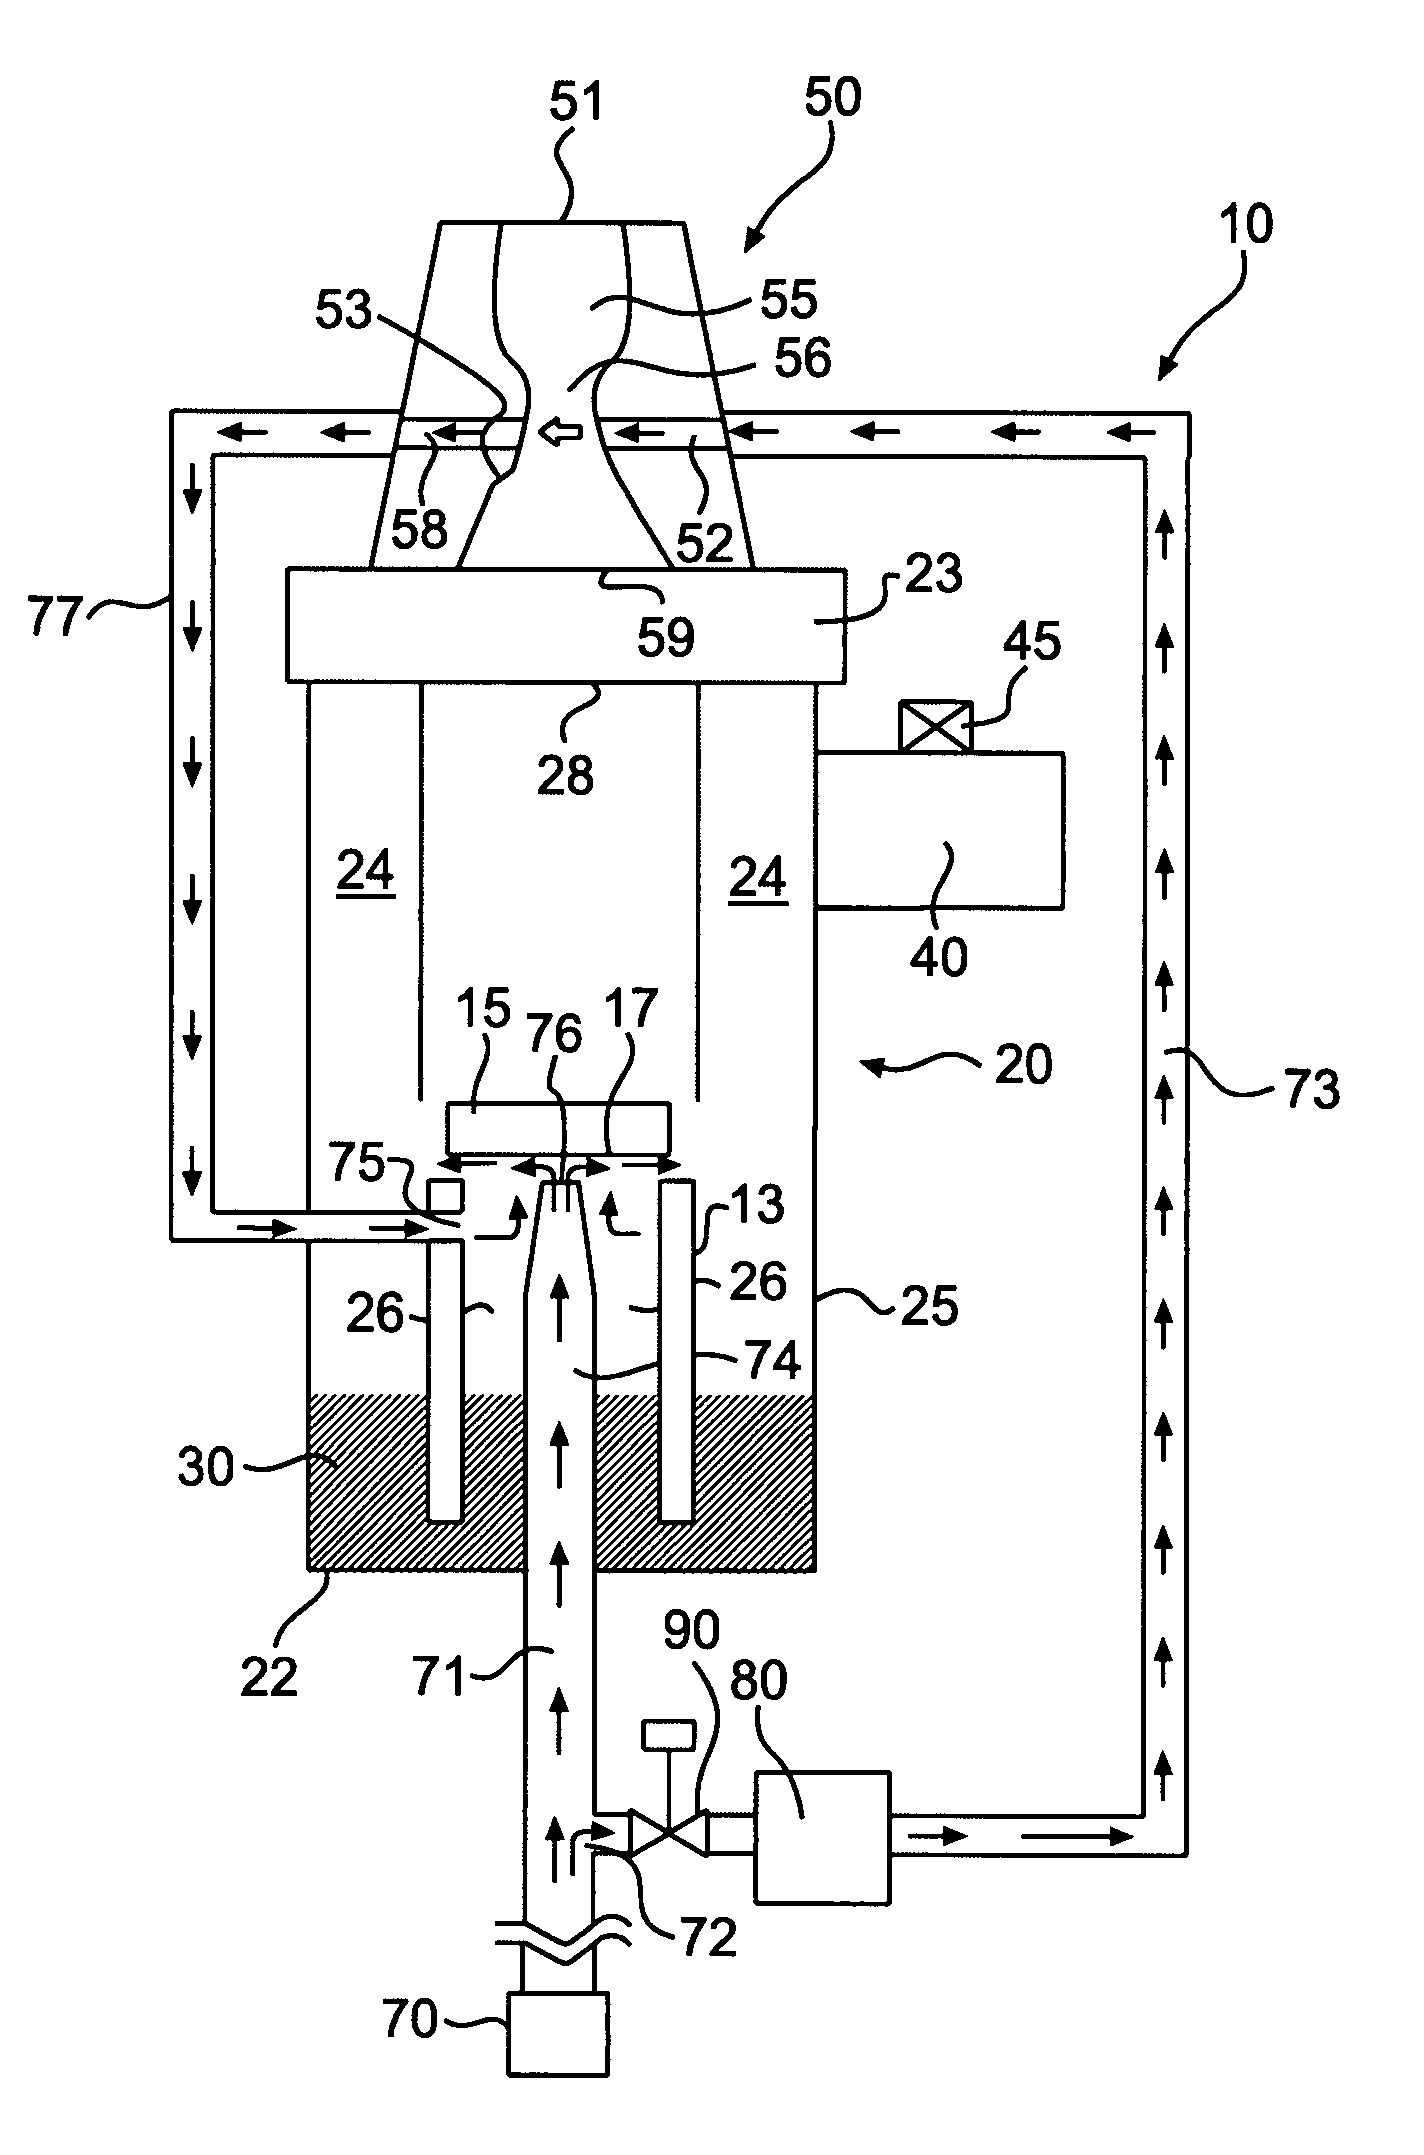 Nebulizer with flow-based fluidic control and related methods